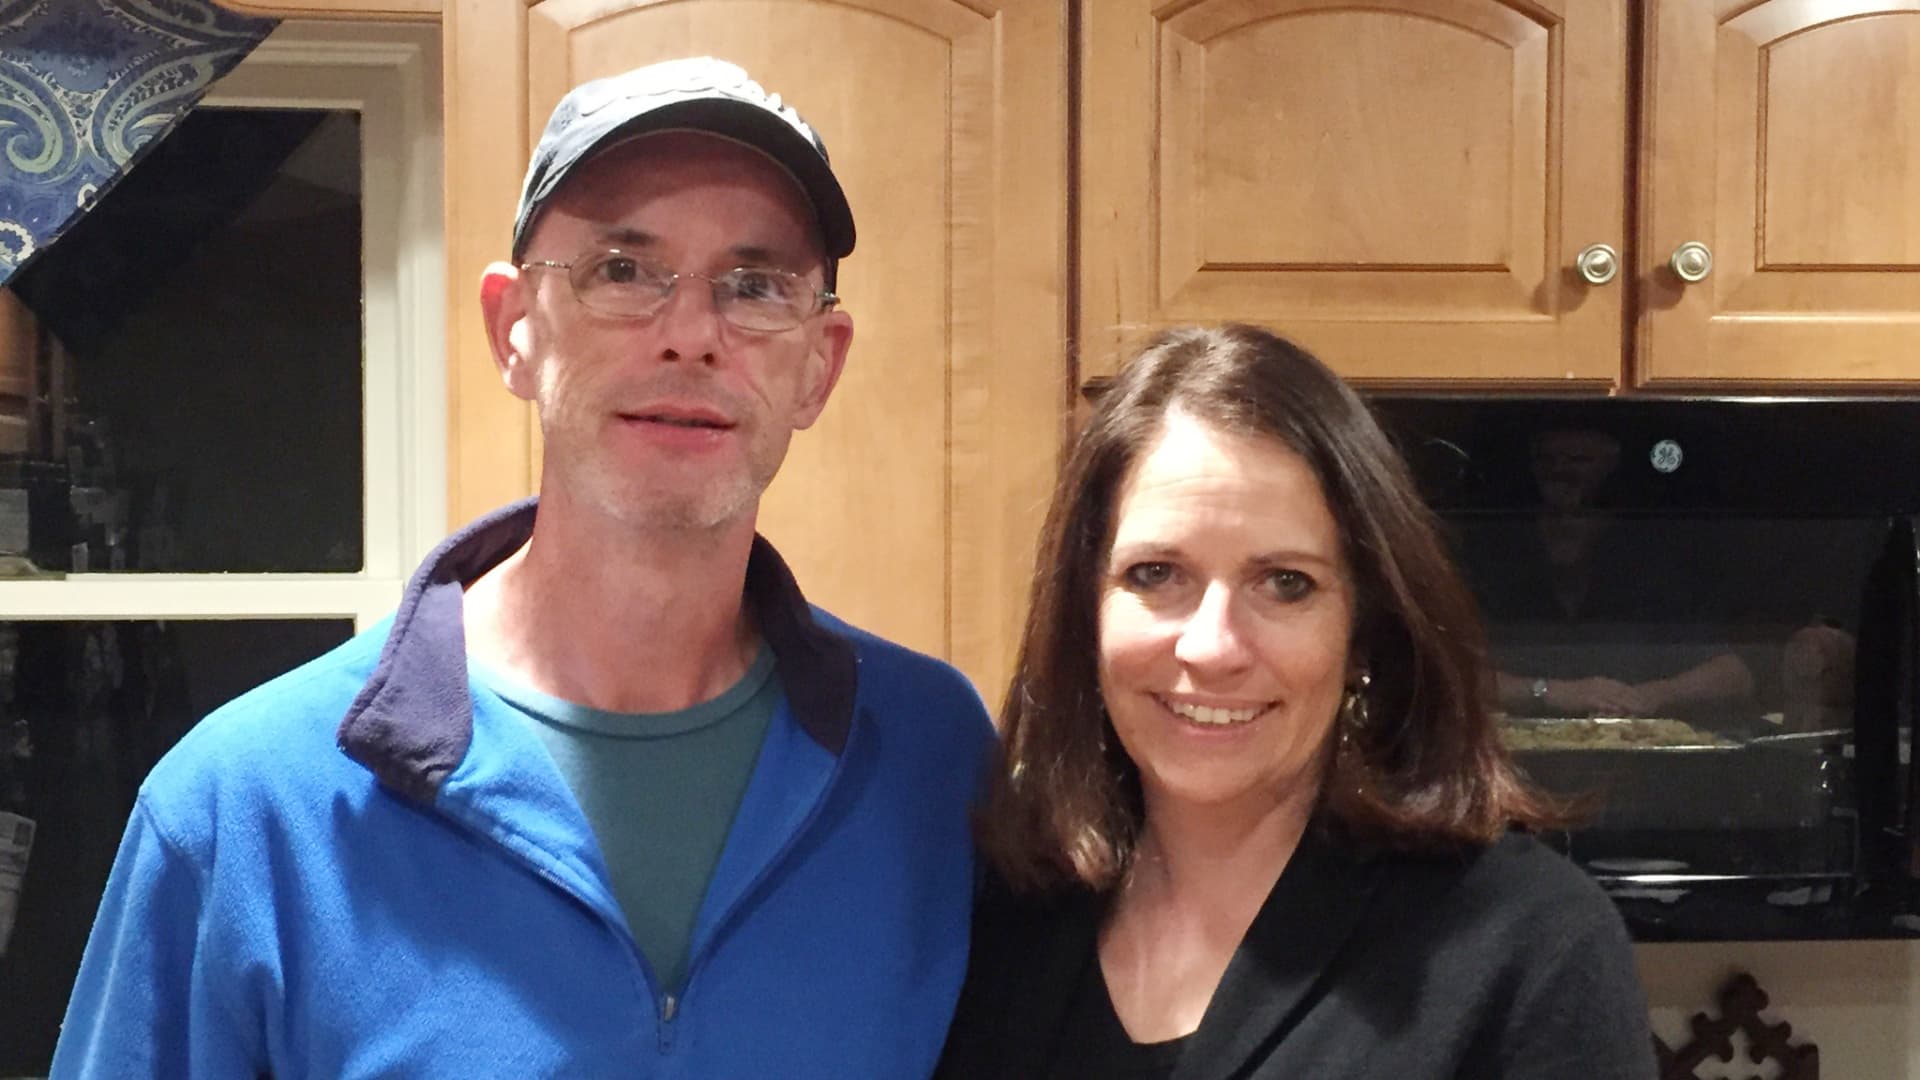 Liz O'Donnell, pictured with her late husband, started a Facebook community for caregivers after she found herself suddenly caring for both of her parents.